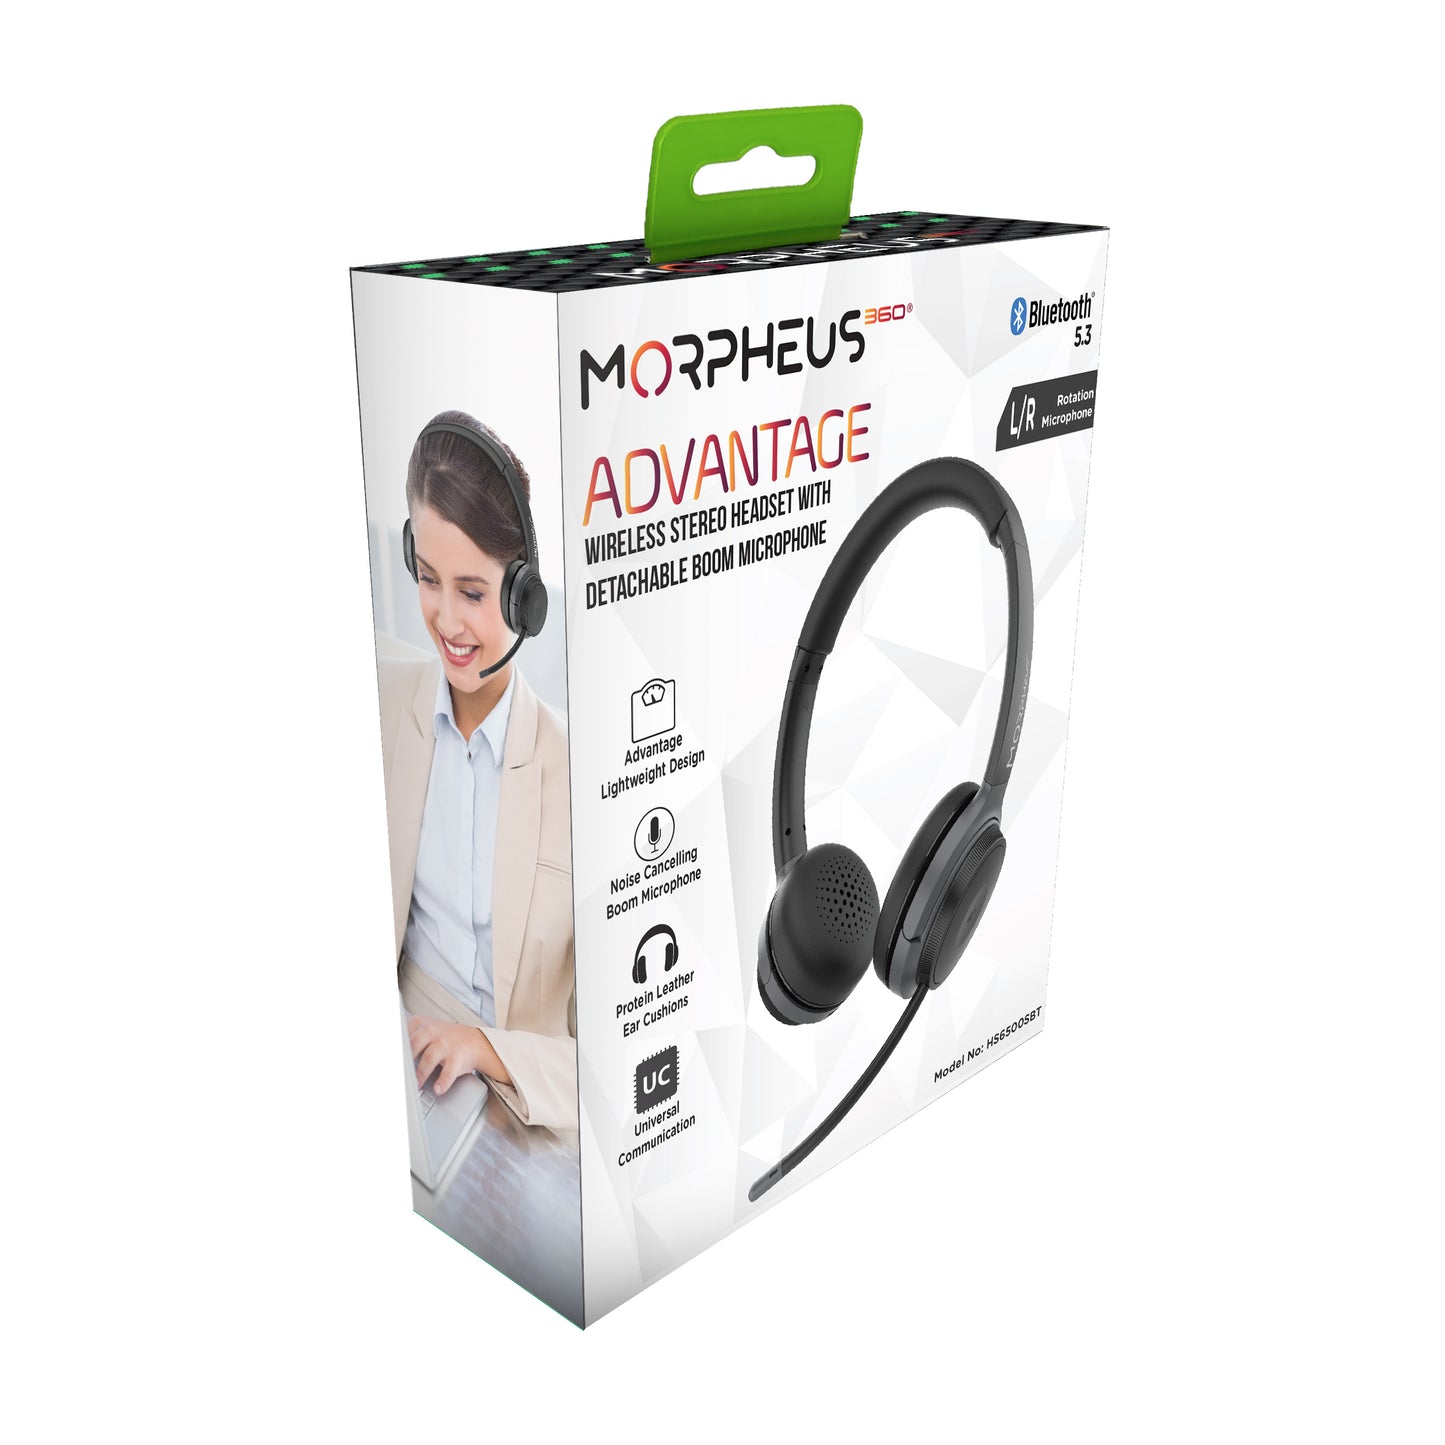 Front angled picture of the Morpheus 360 Advantage Wireless Stereo Headset retail package.